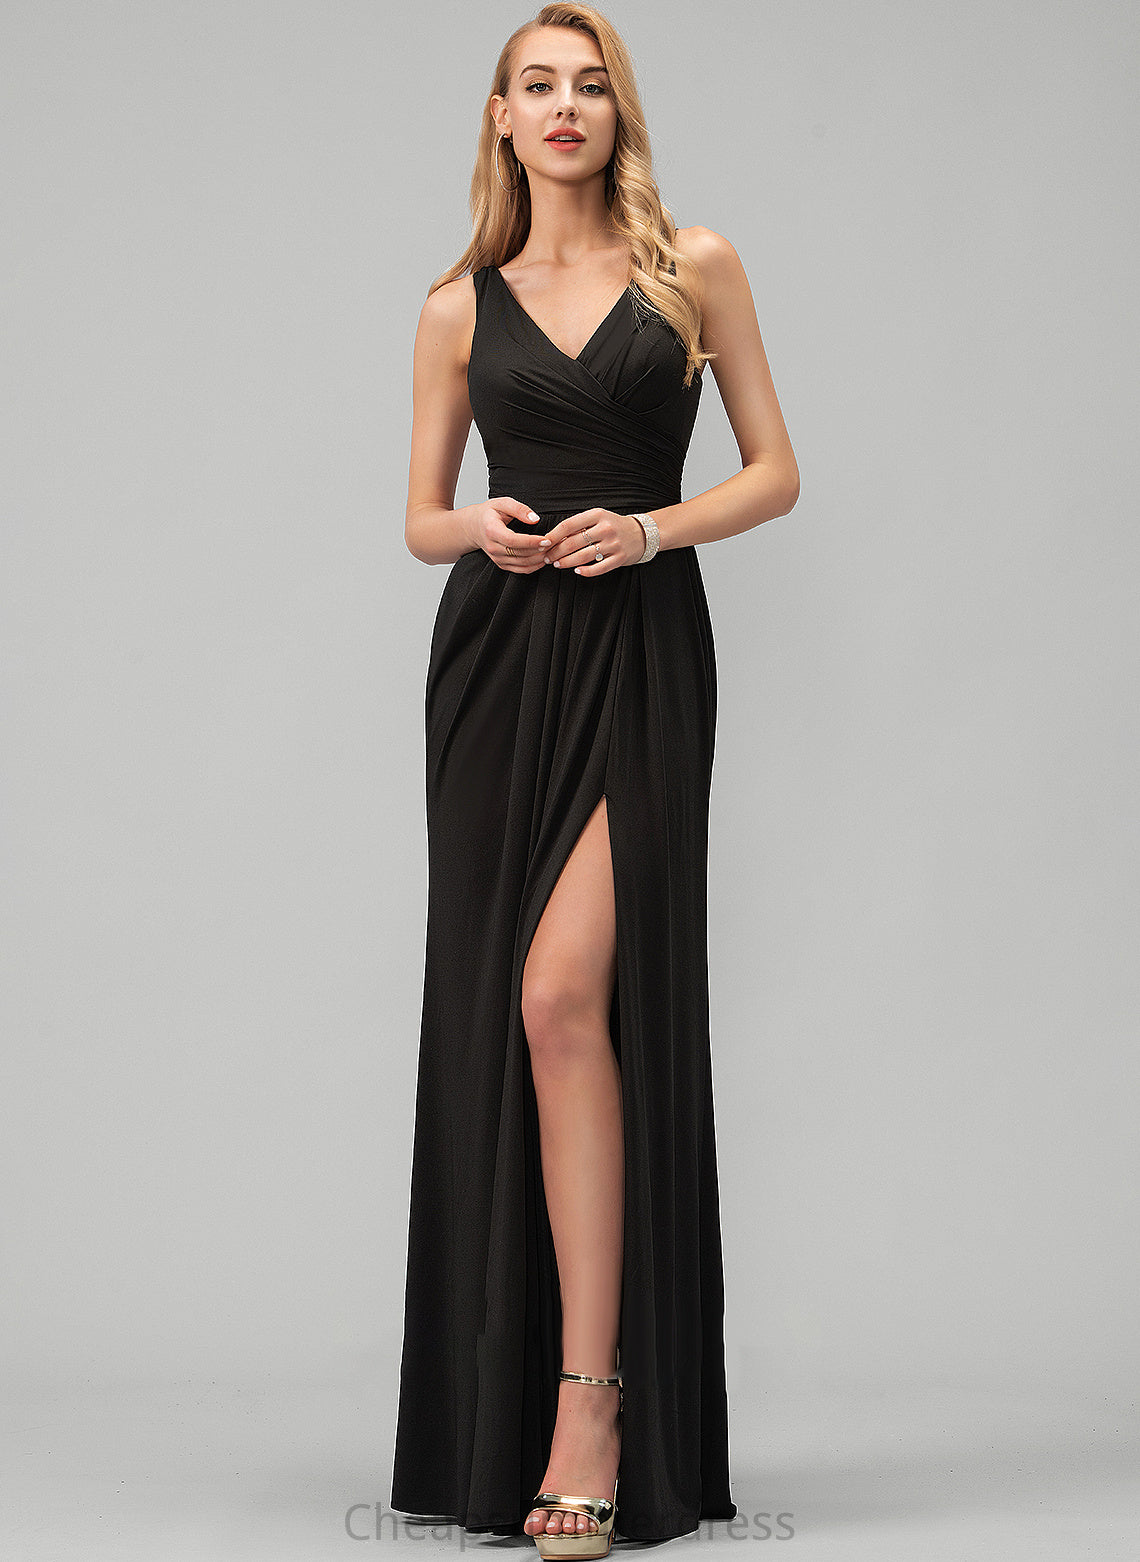 A-Line Front Split Jersey Prom Dresses Floor-Length Ruffle With V-neck Abigayle